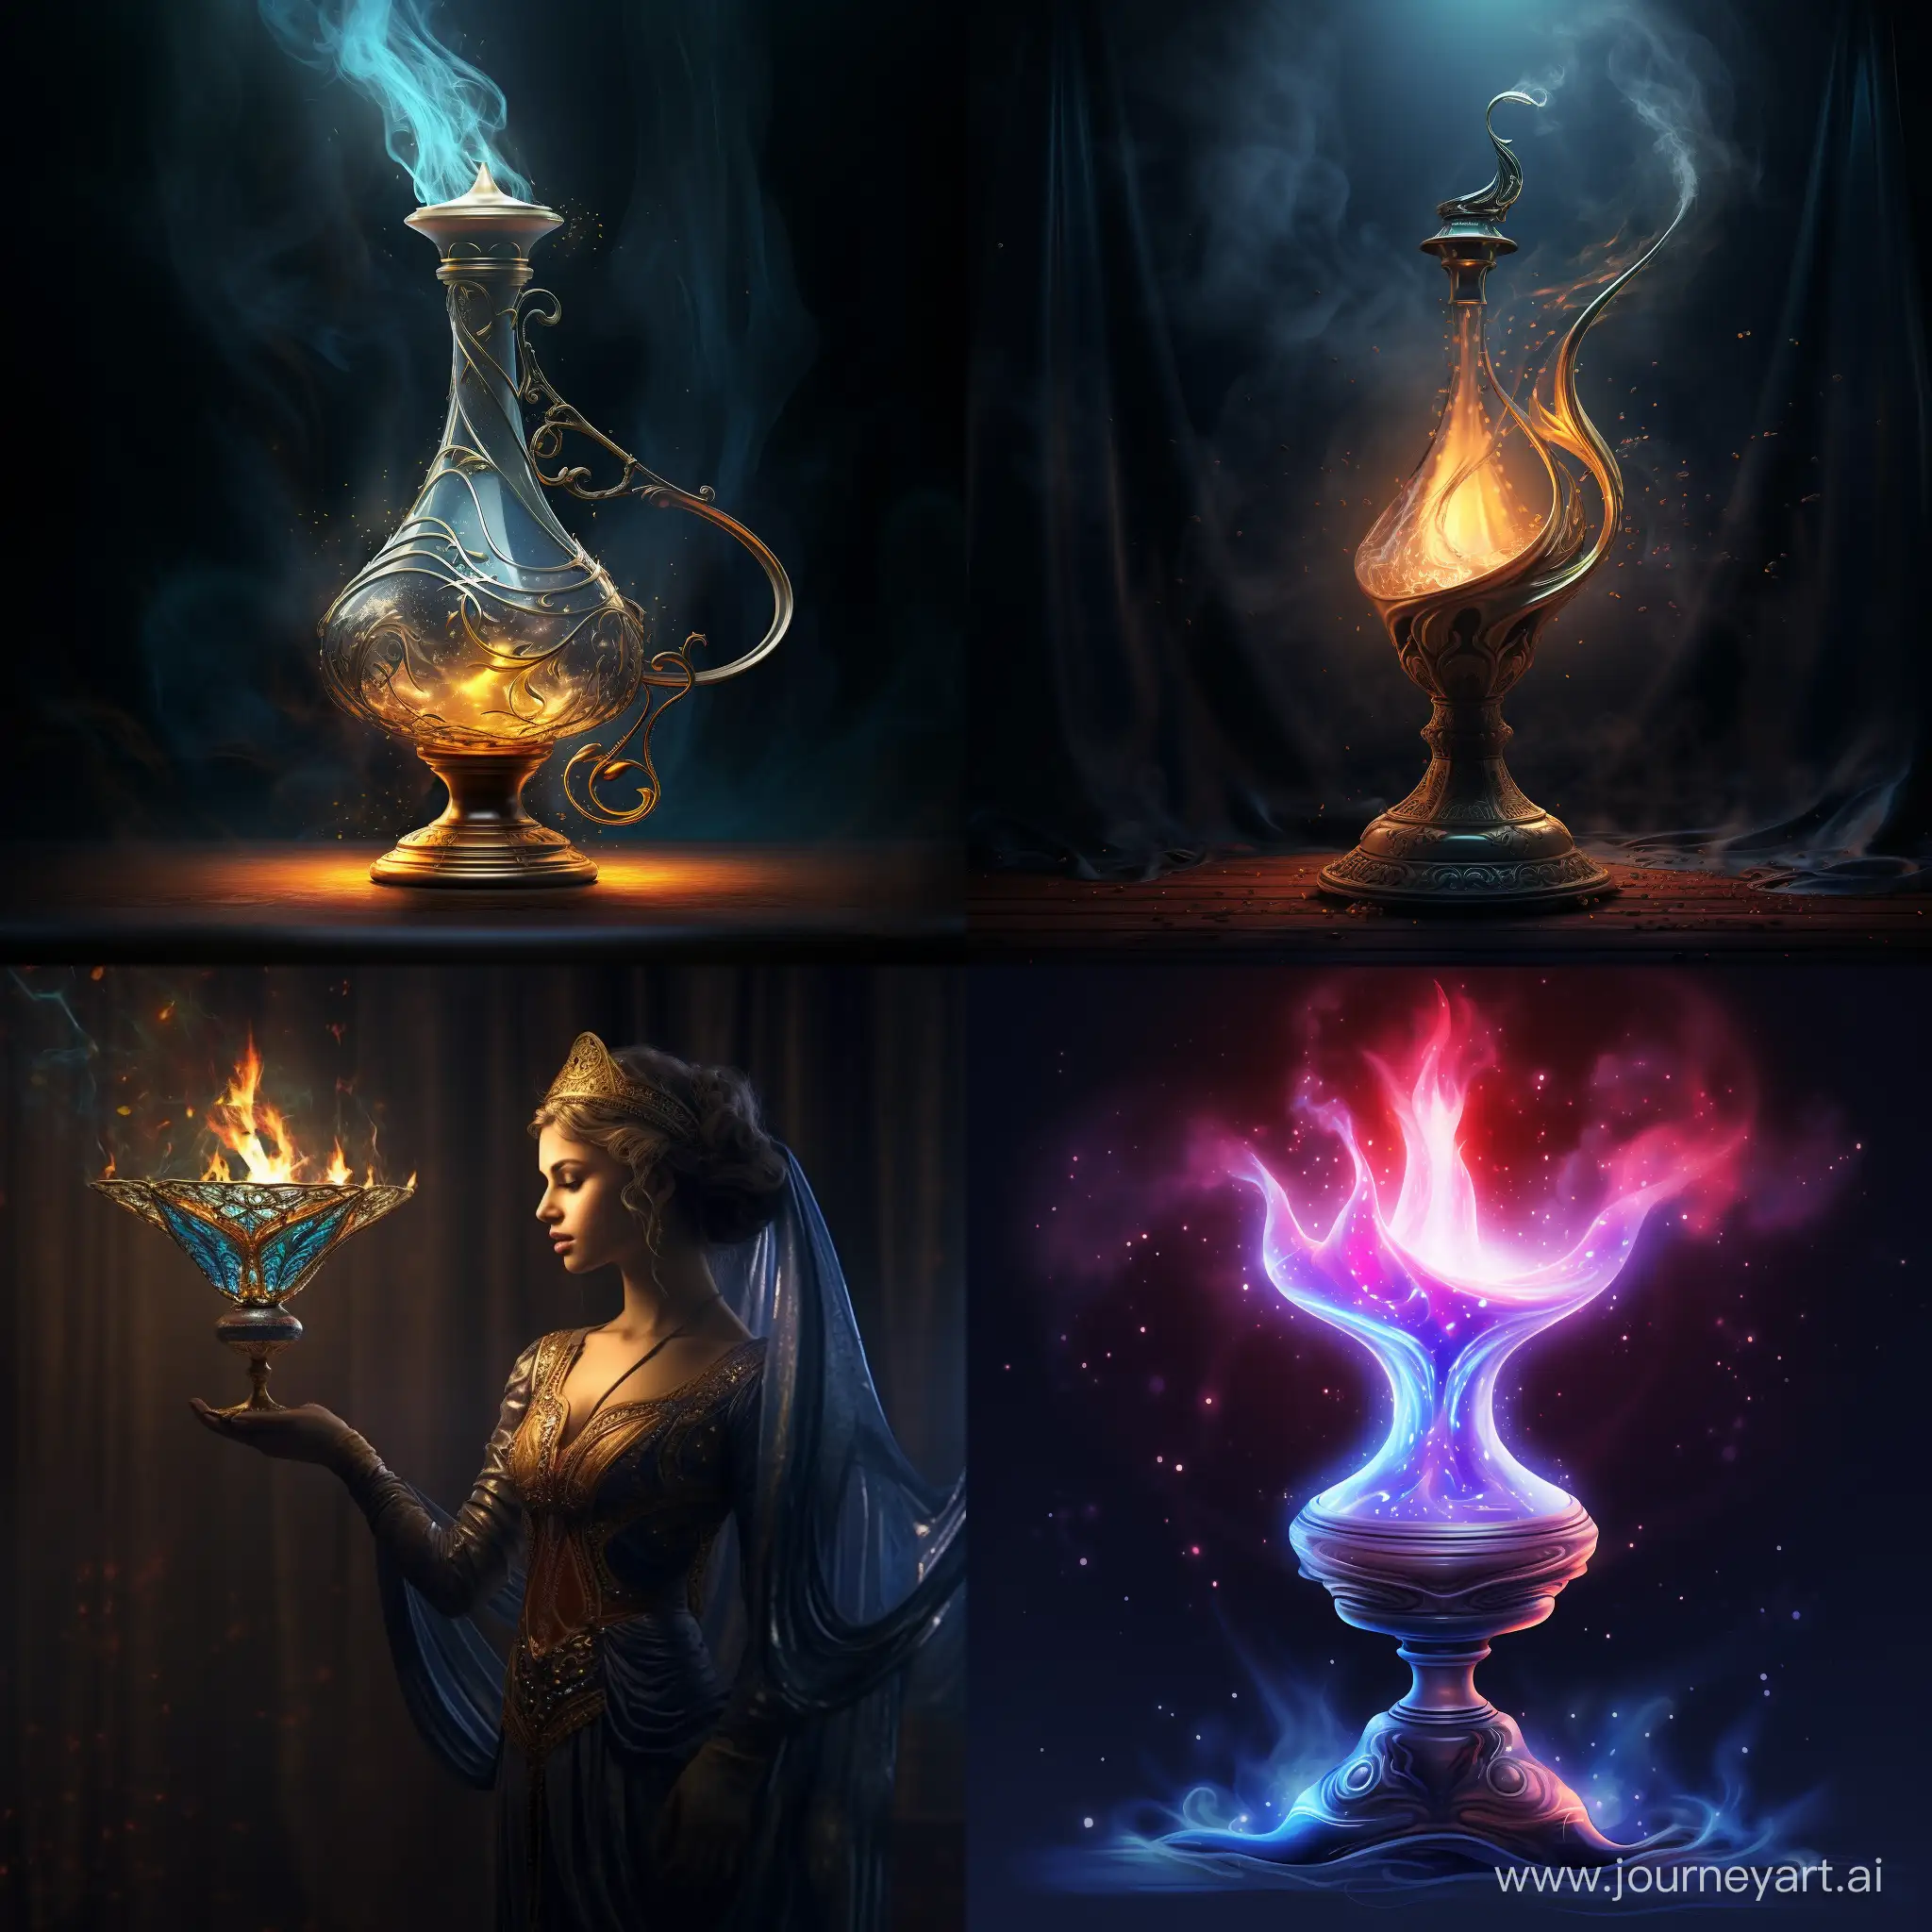 /imagine a sleek and magical lamp genie. remove lamp. Keep it clean, scalable, and modern. digital art